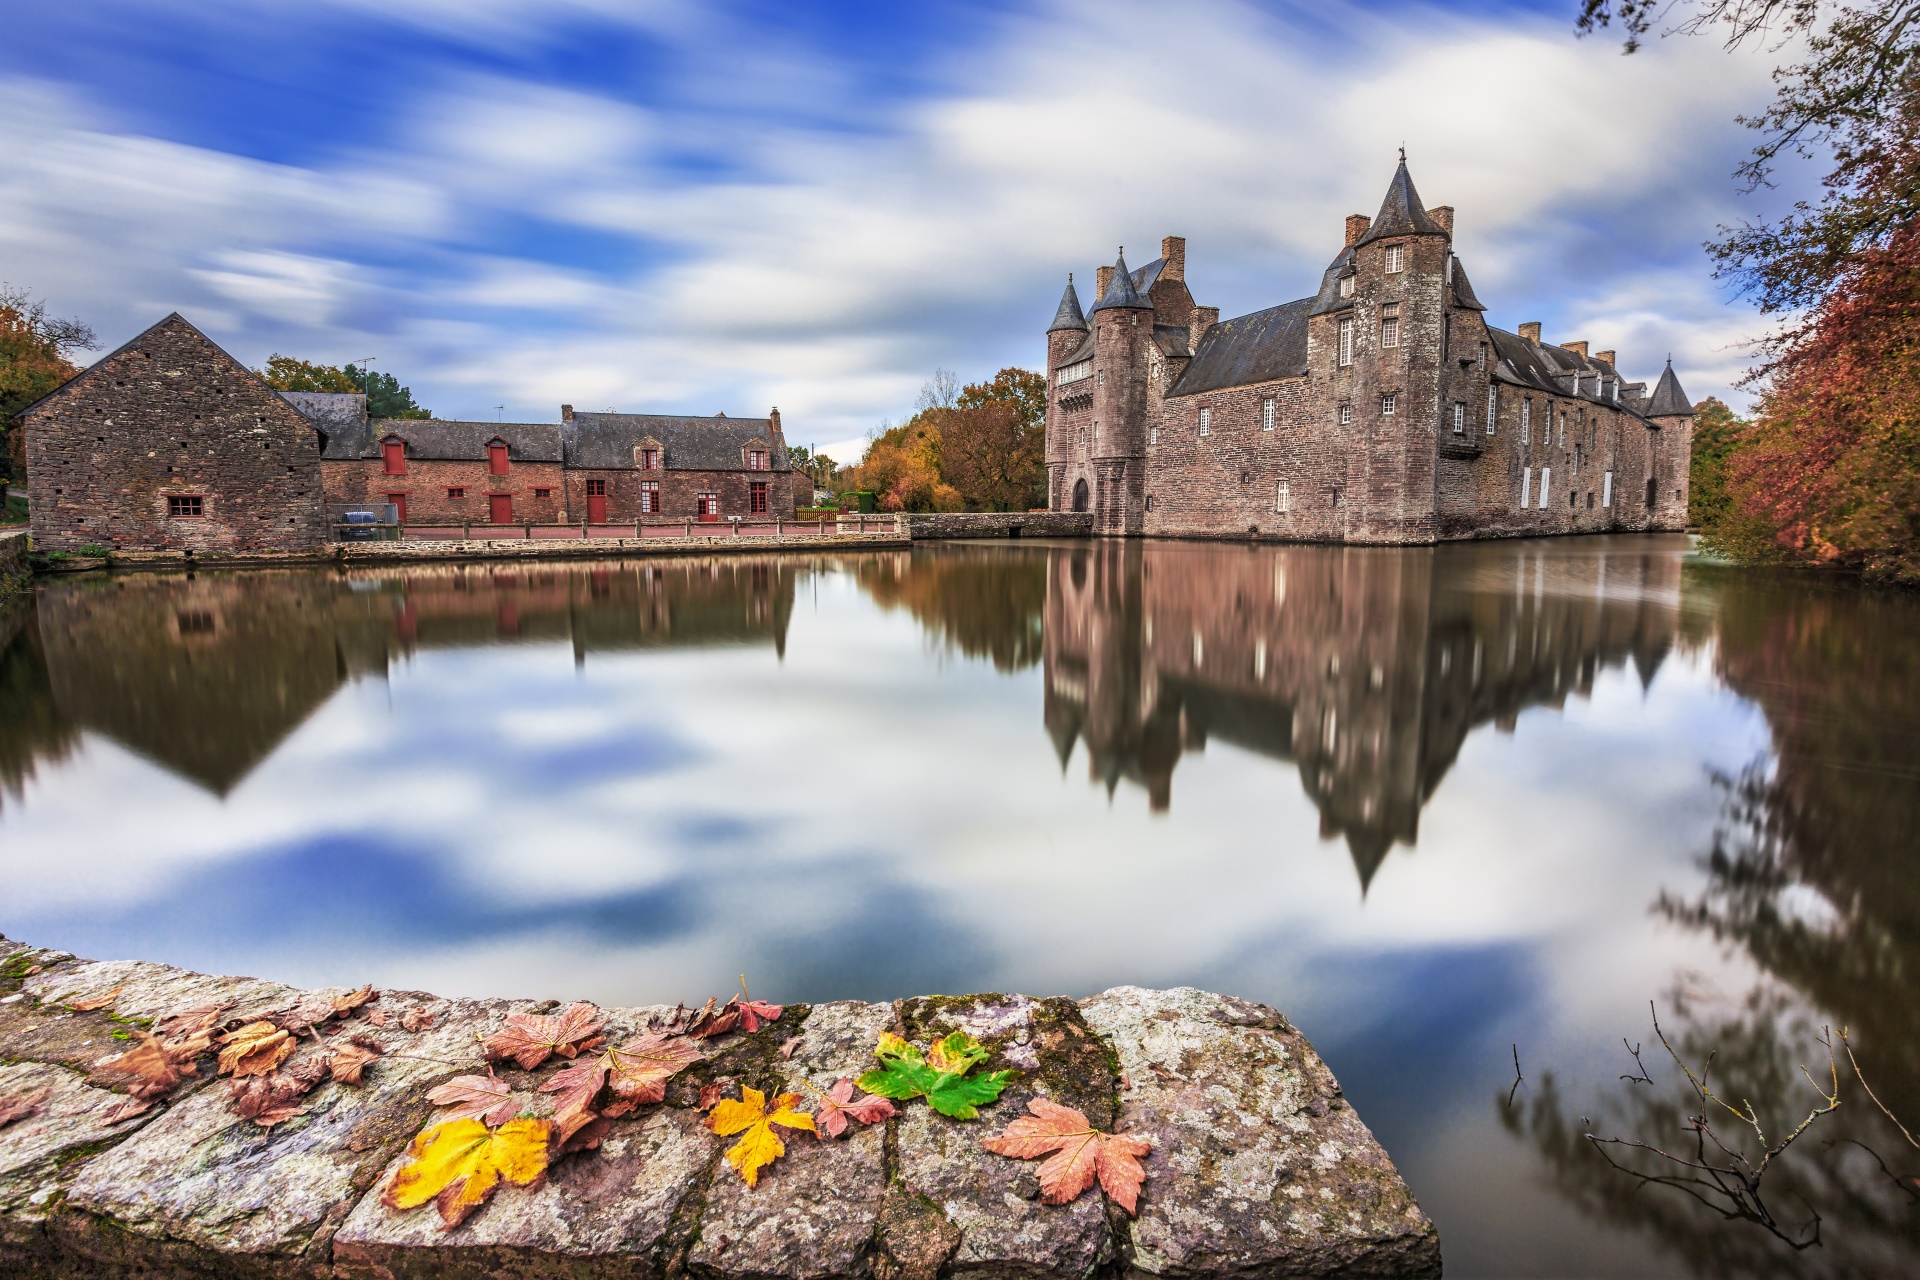 General 1920x1280 France castle reflection building water